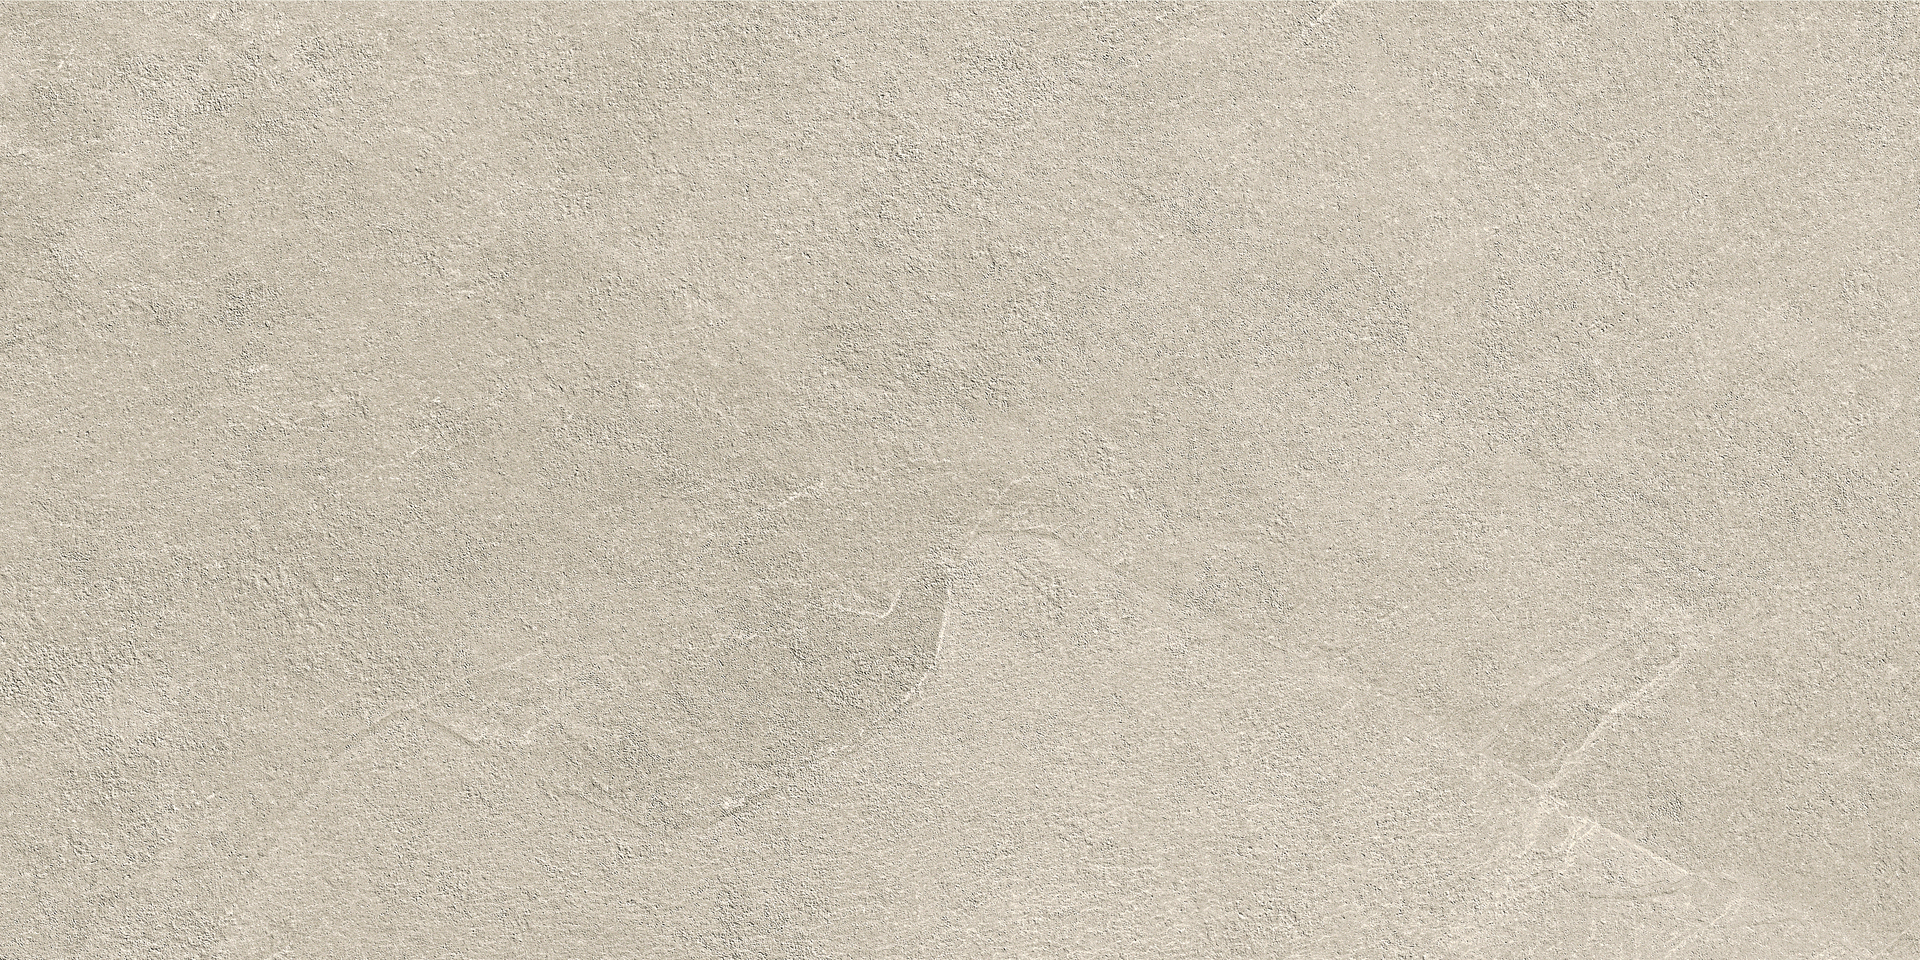 Panaria Zero.3 Stone Trace Glade Antibacterial - Naturale PZXST30 60x120cm rectified 6mm